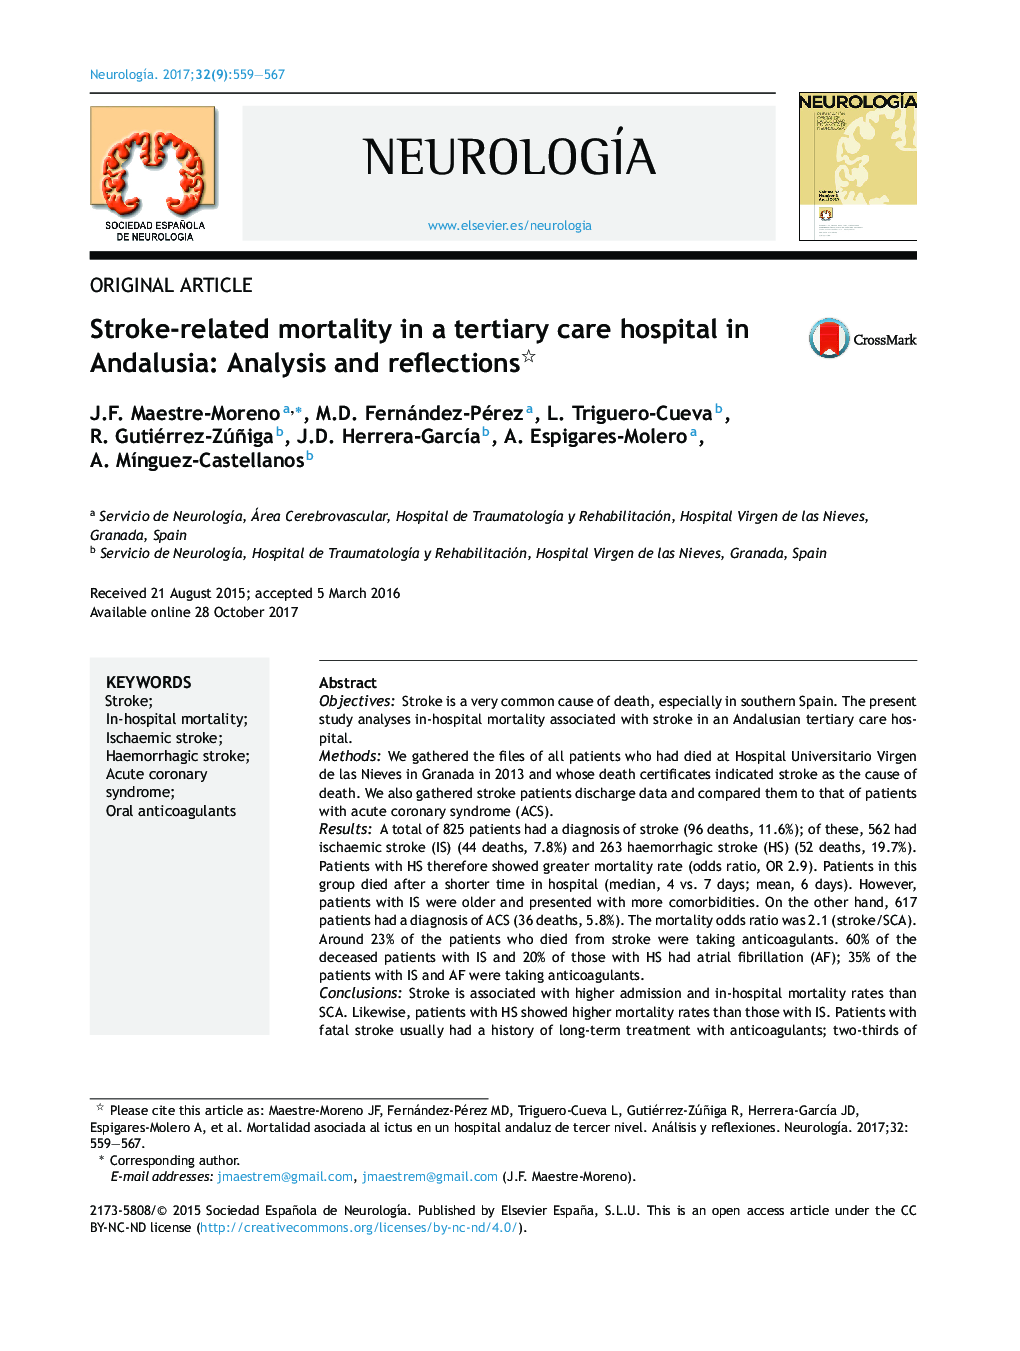 Stroke-related mortality in a tertiary care hospital in Andalusia: Analysis and reflections